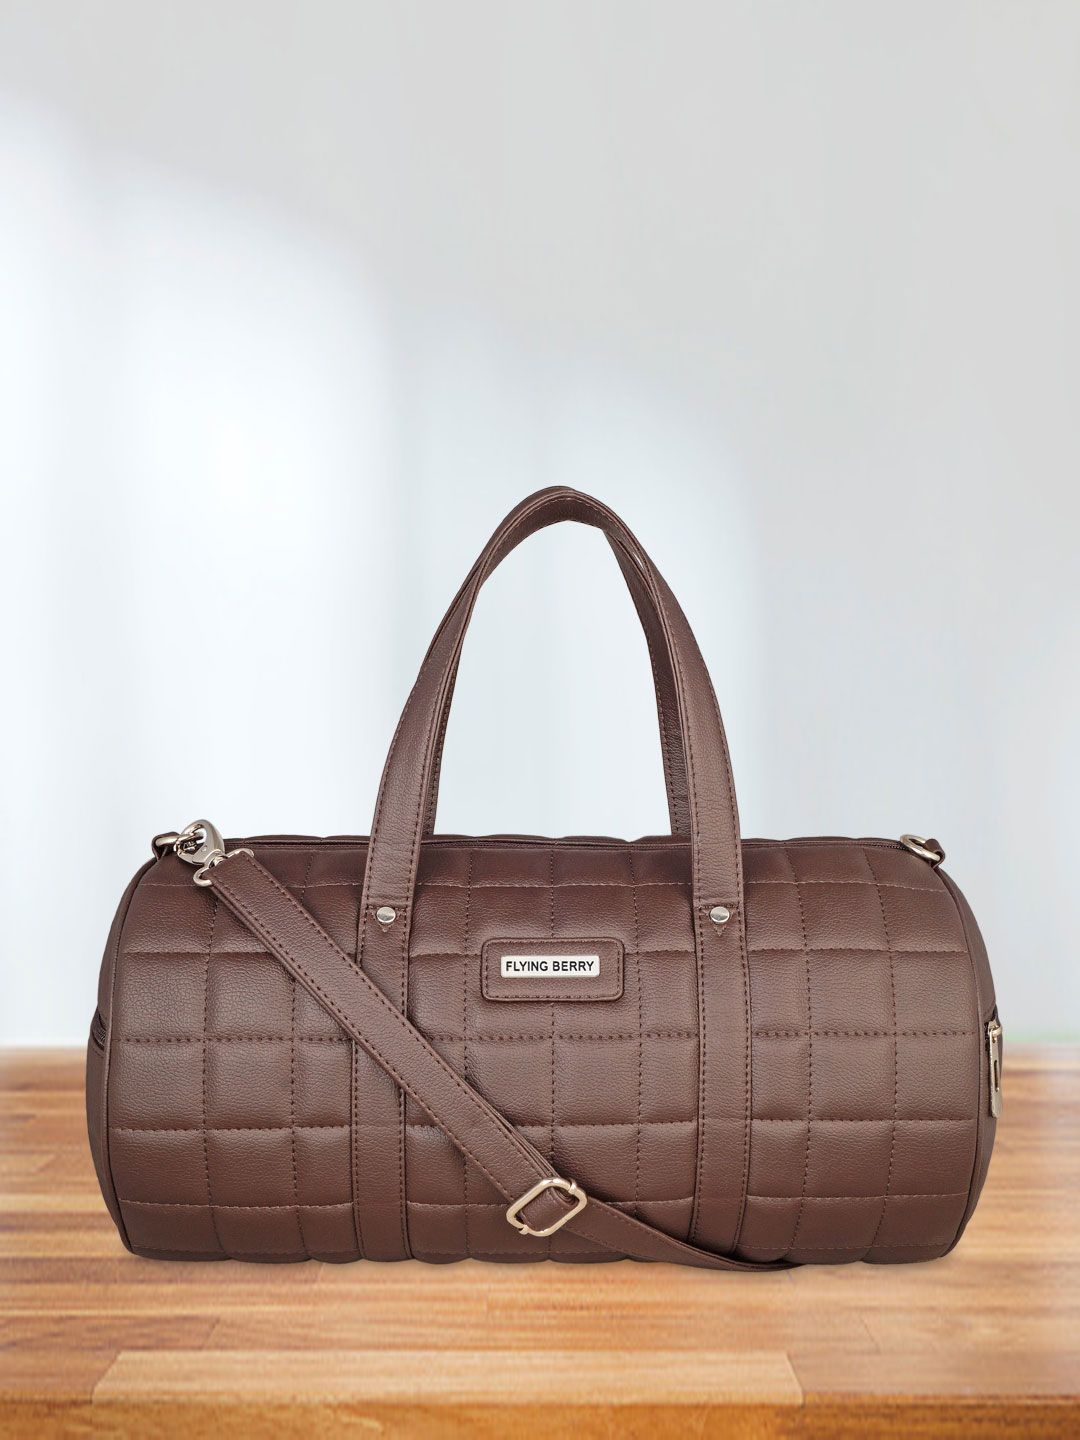 FLYING BERRY Brown Textured Duffel Bag Price in India